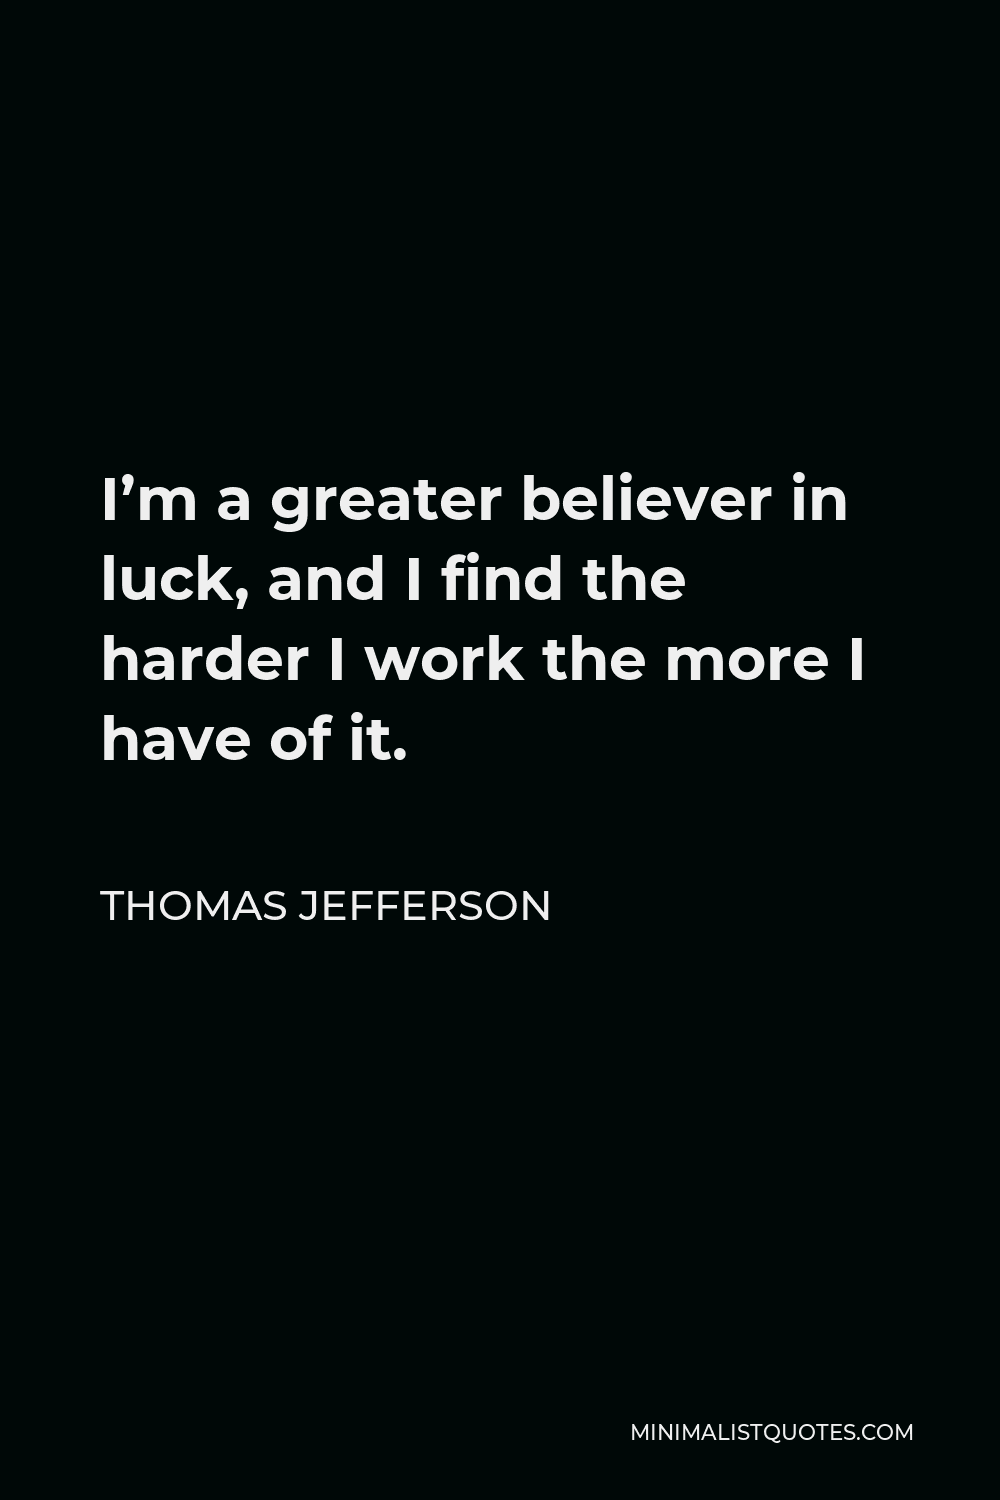 Thomas Jefferson Quote - I’m a greater believer in luck, and I find the harder I work the more I have of it.